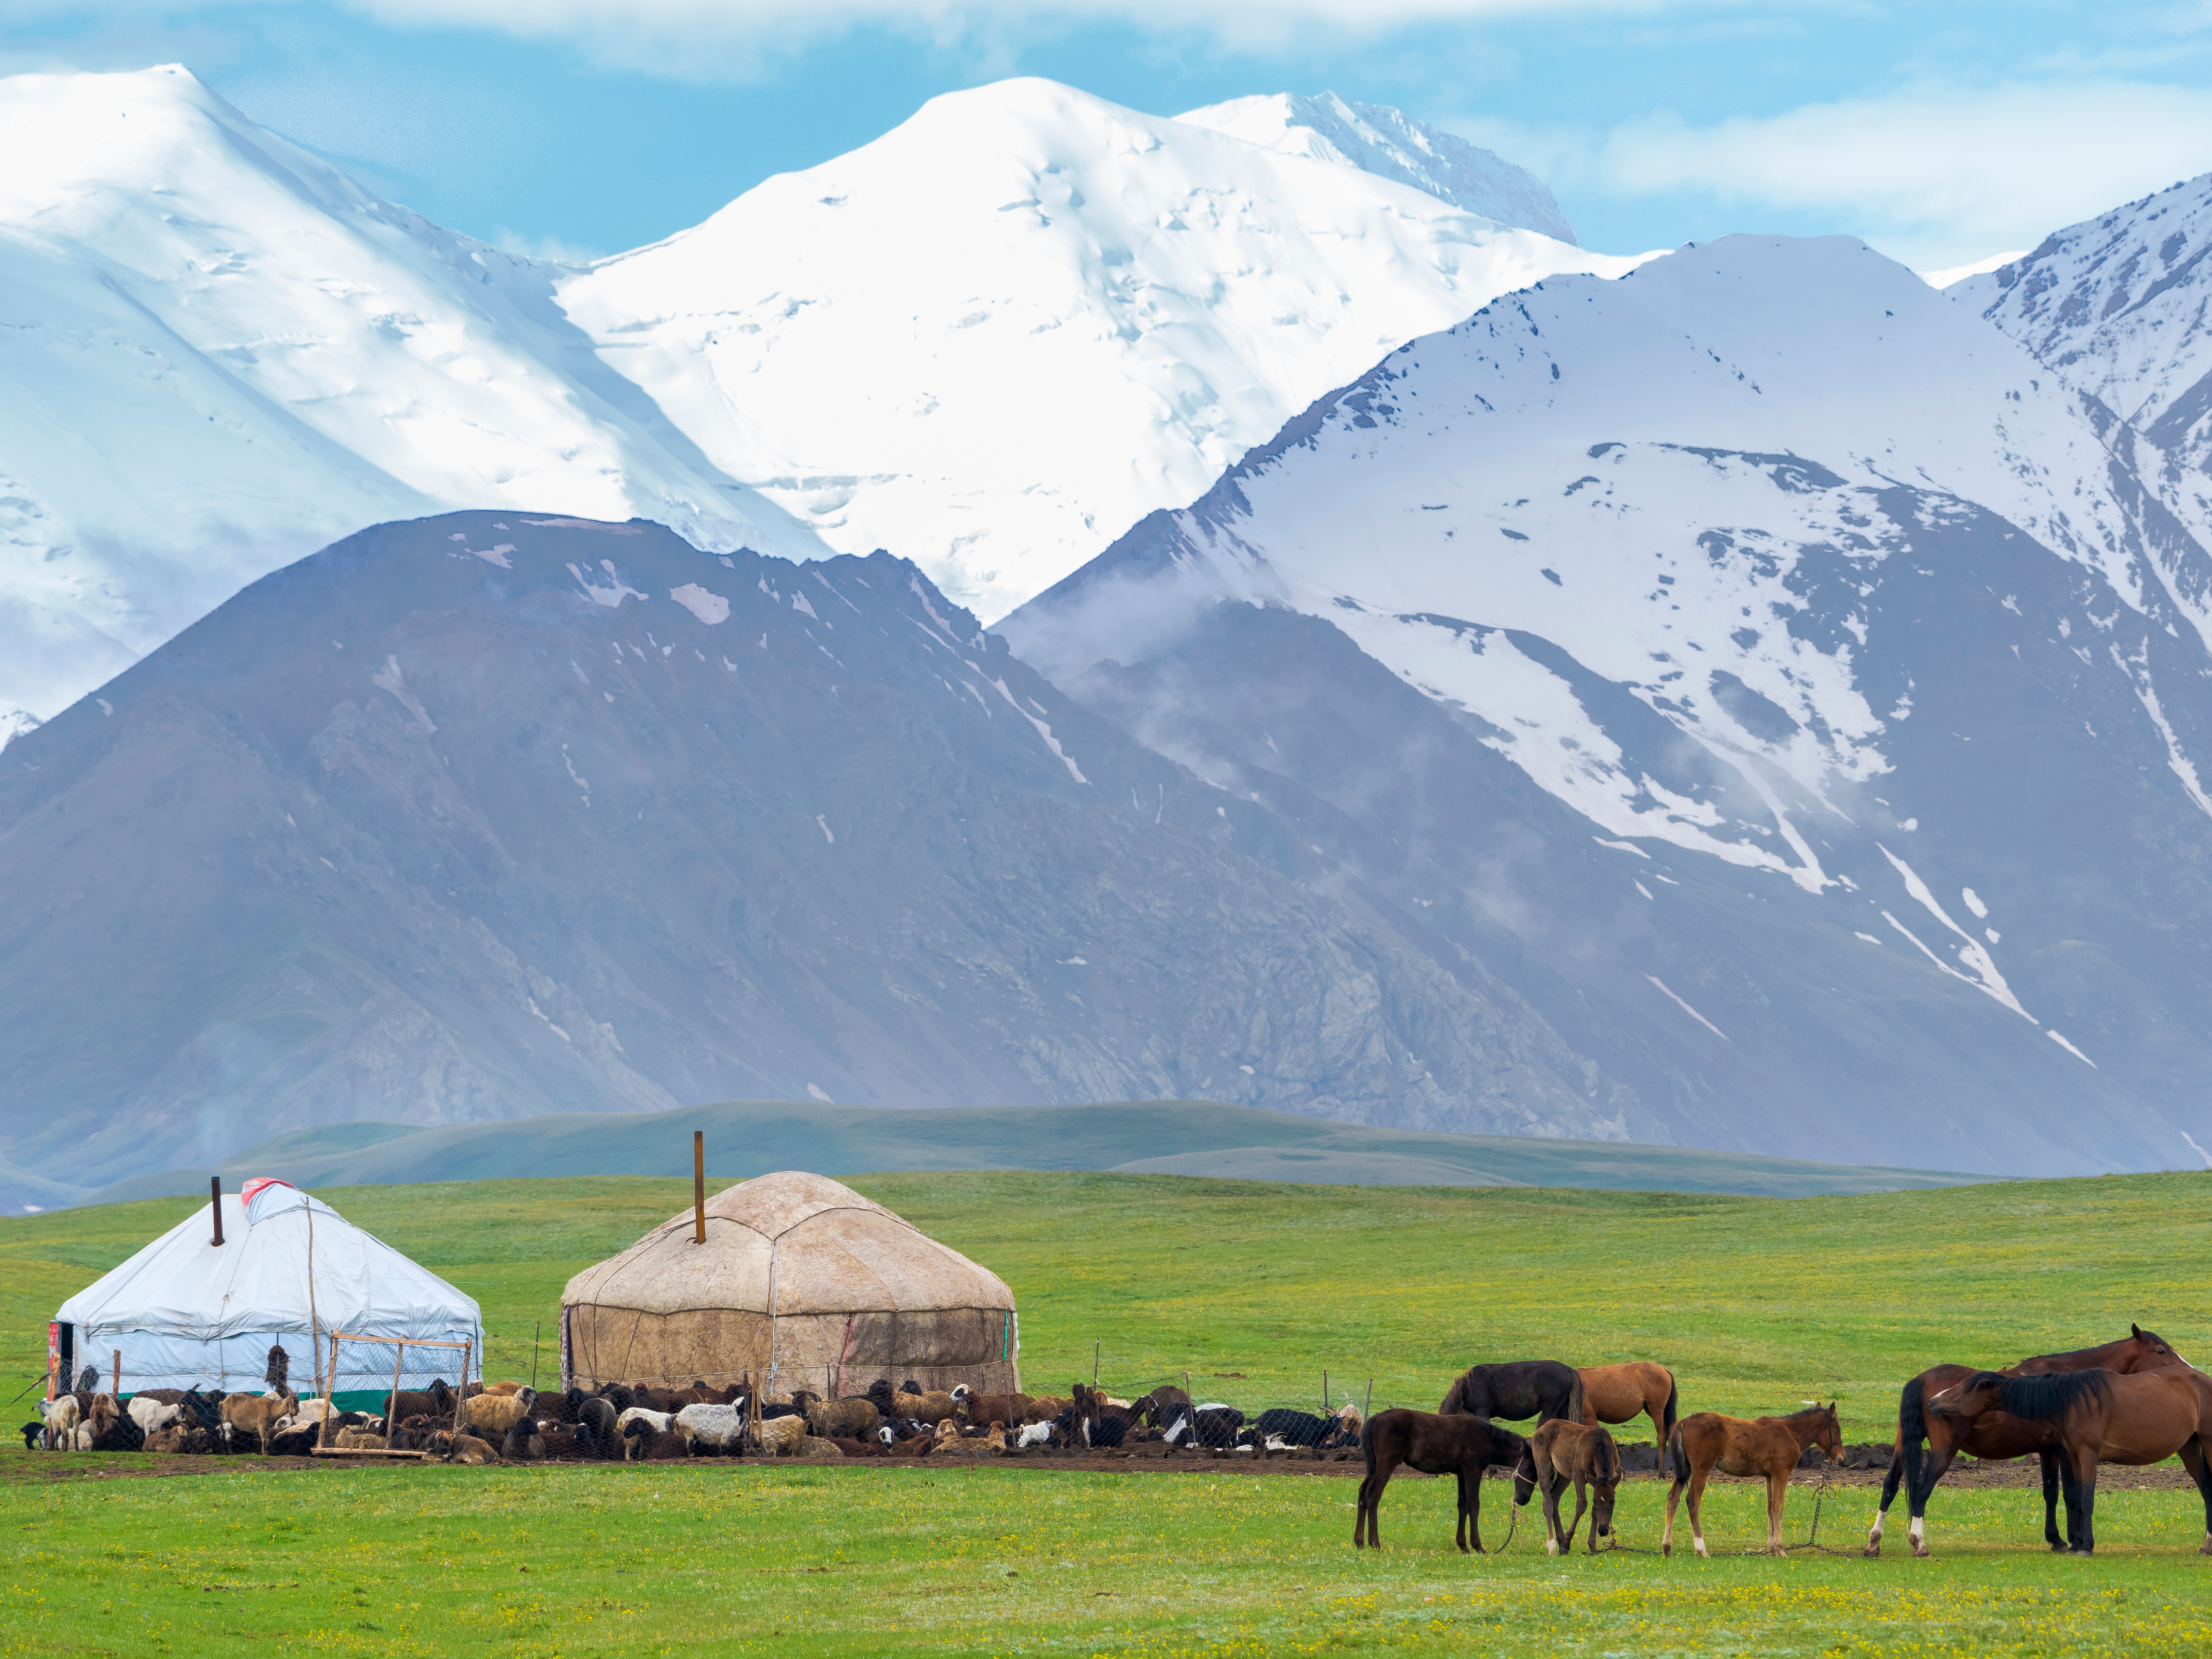 The idyllic lifestyle of nomads in Kyrgyzstan - Photo credit: Danita Delimont